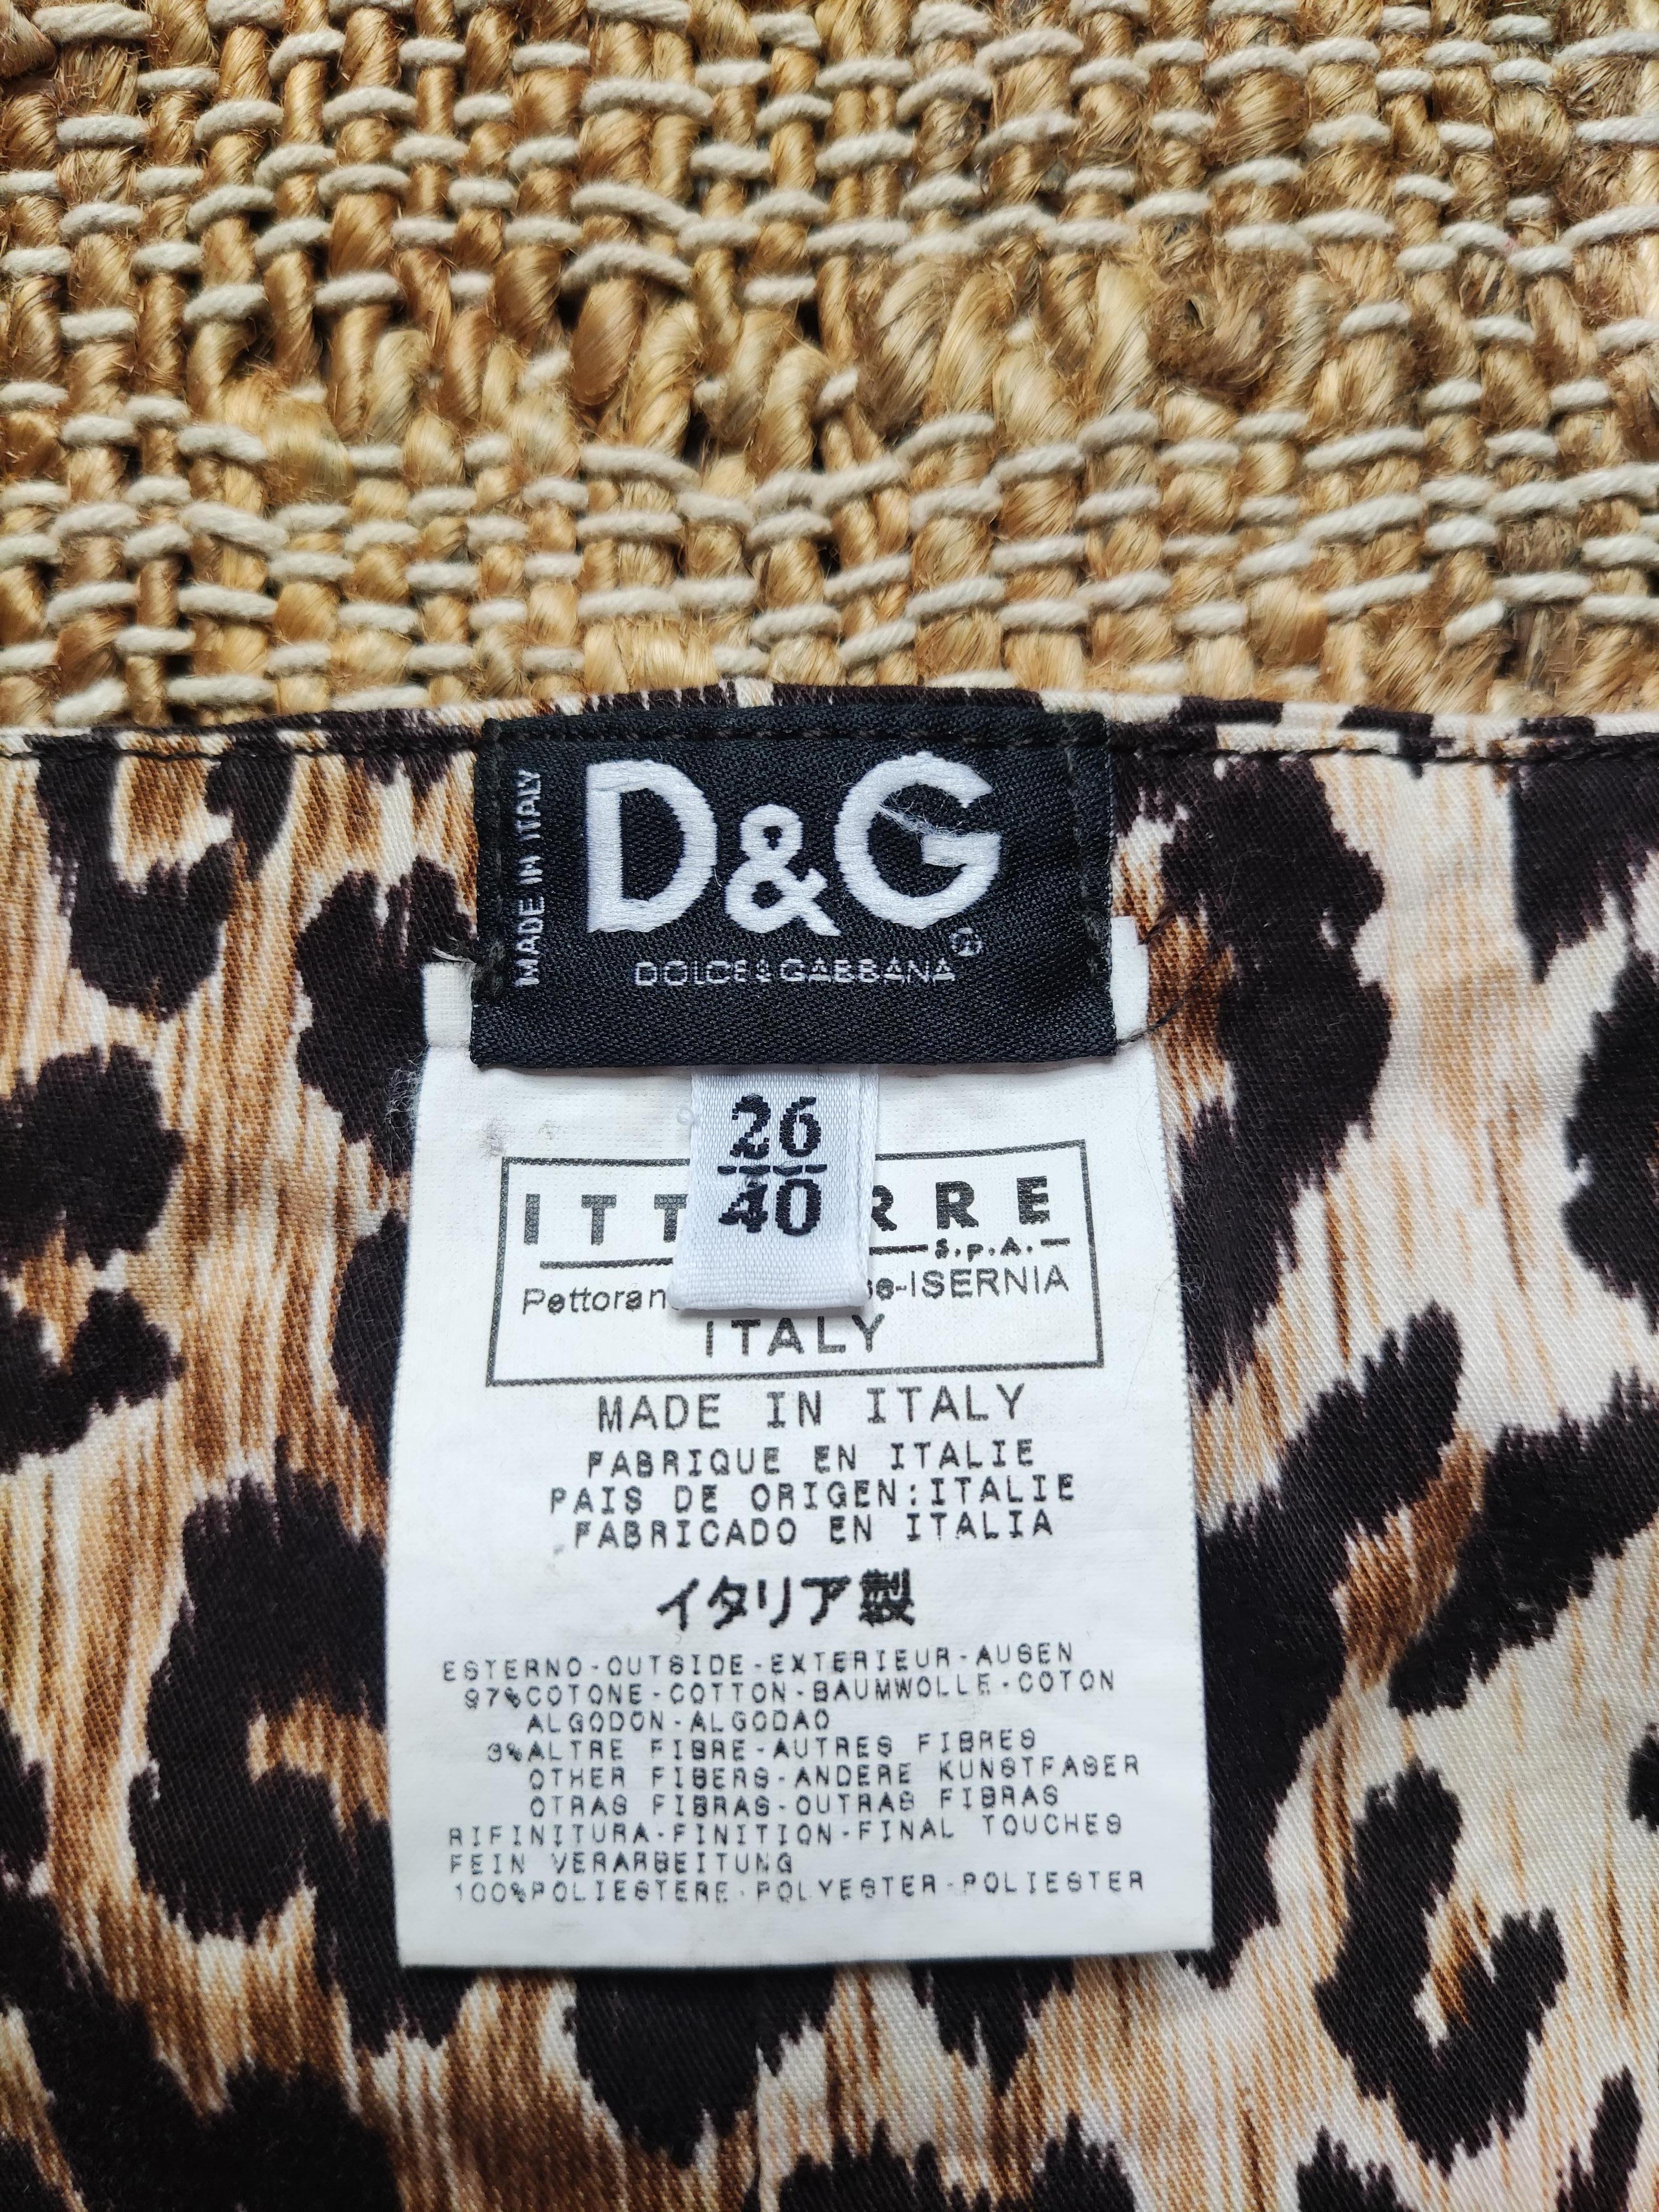 D&G Dolce and Gabbana Leopard Animal Tiger Bustier Vintage Cargo Top Corset For Sale 6